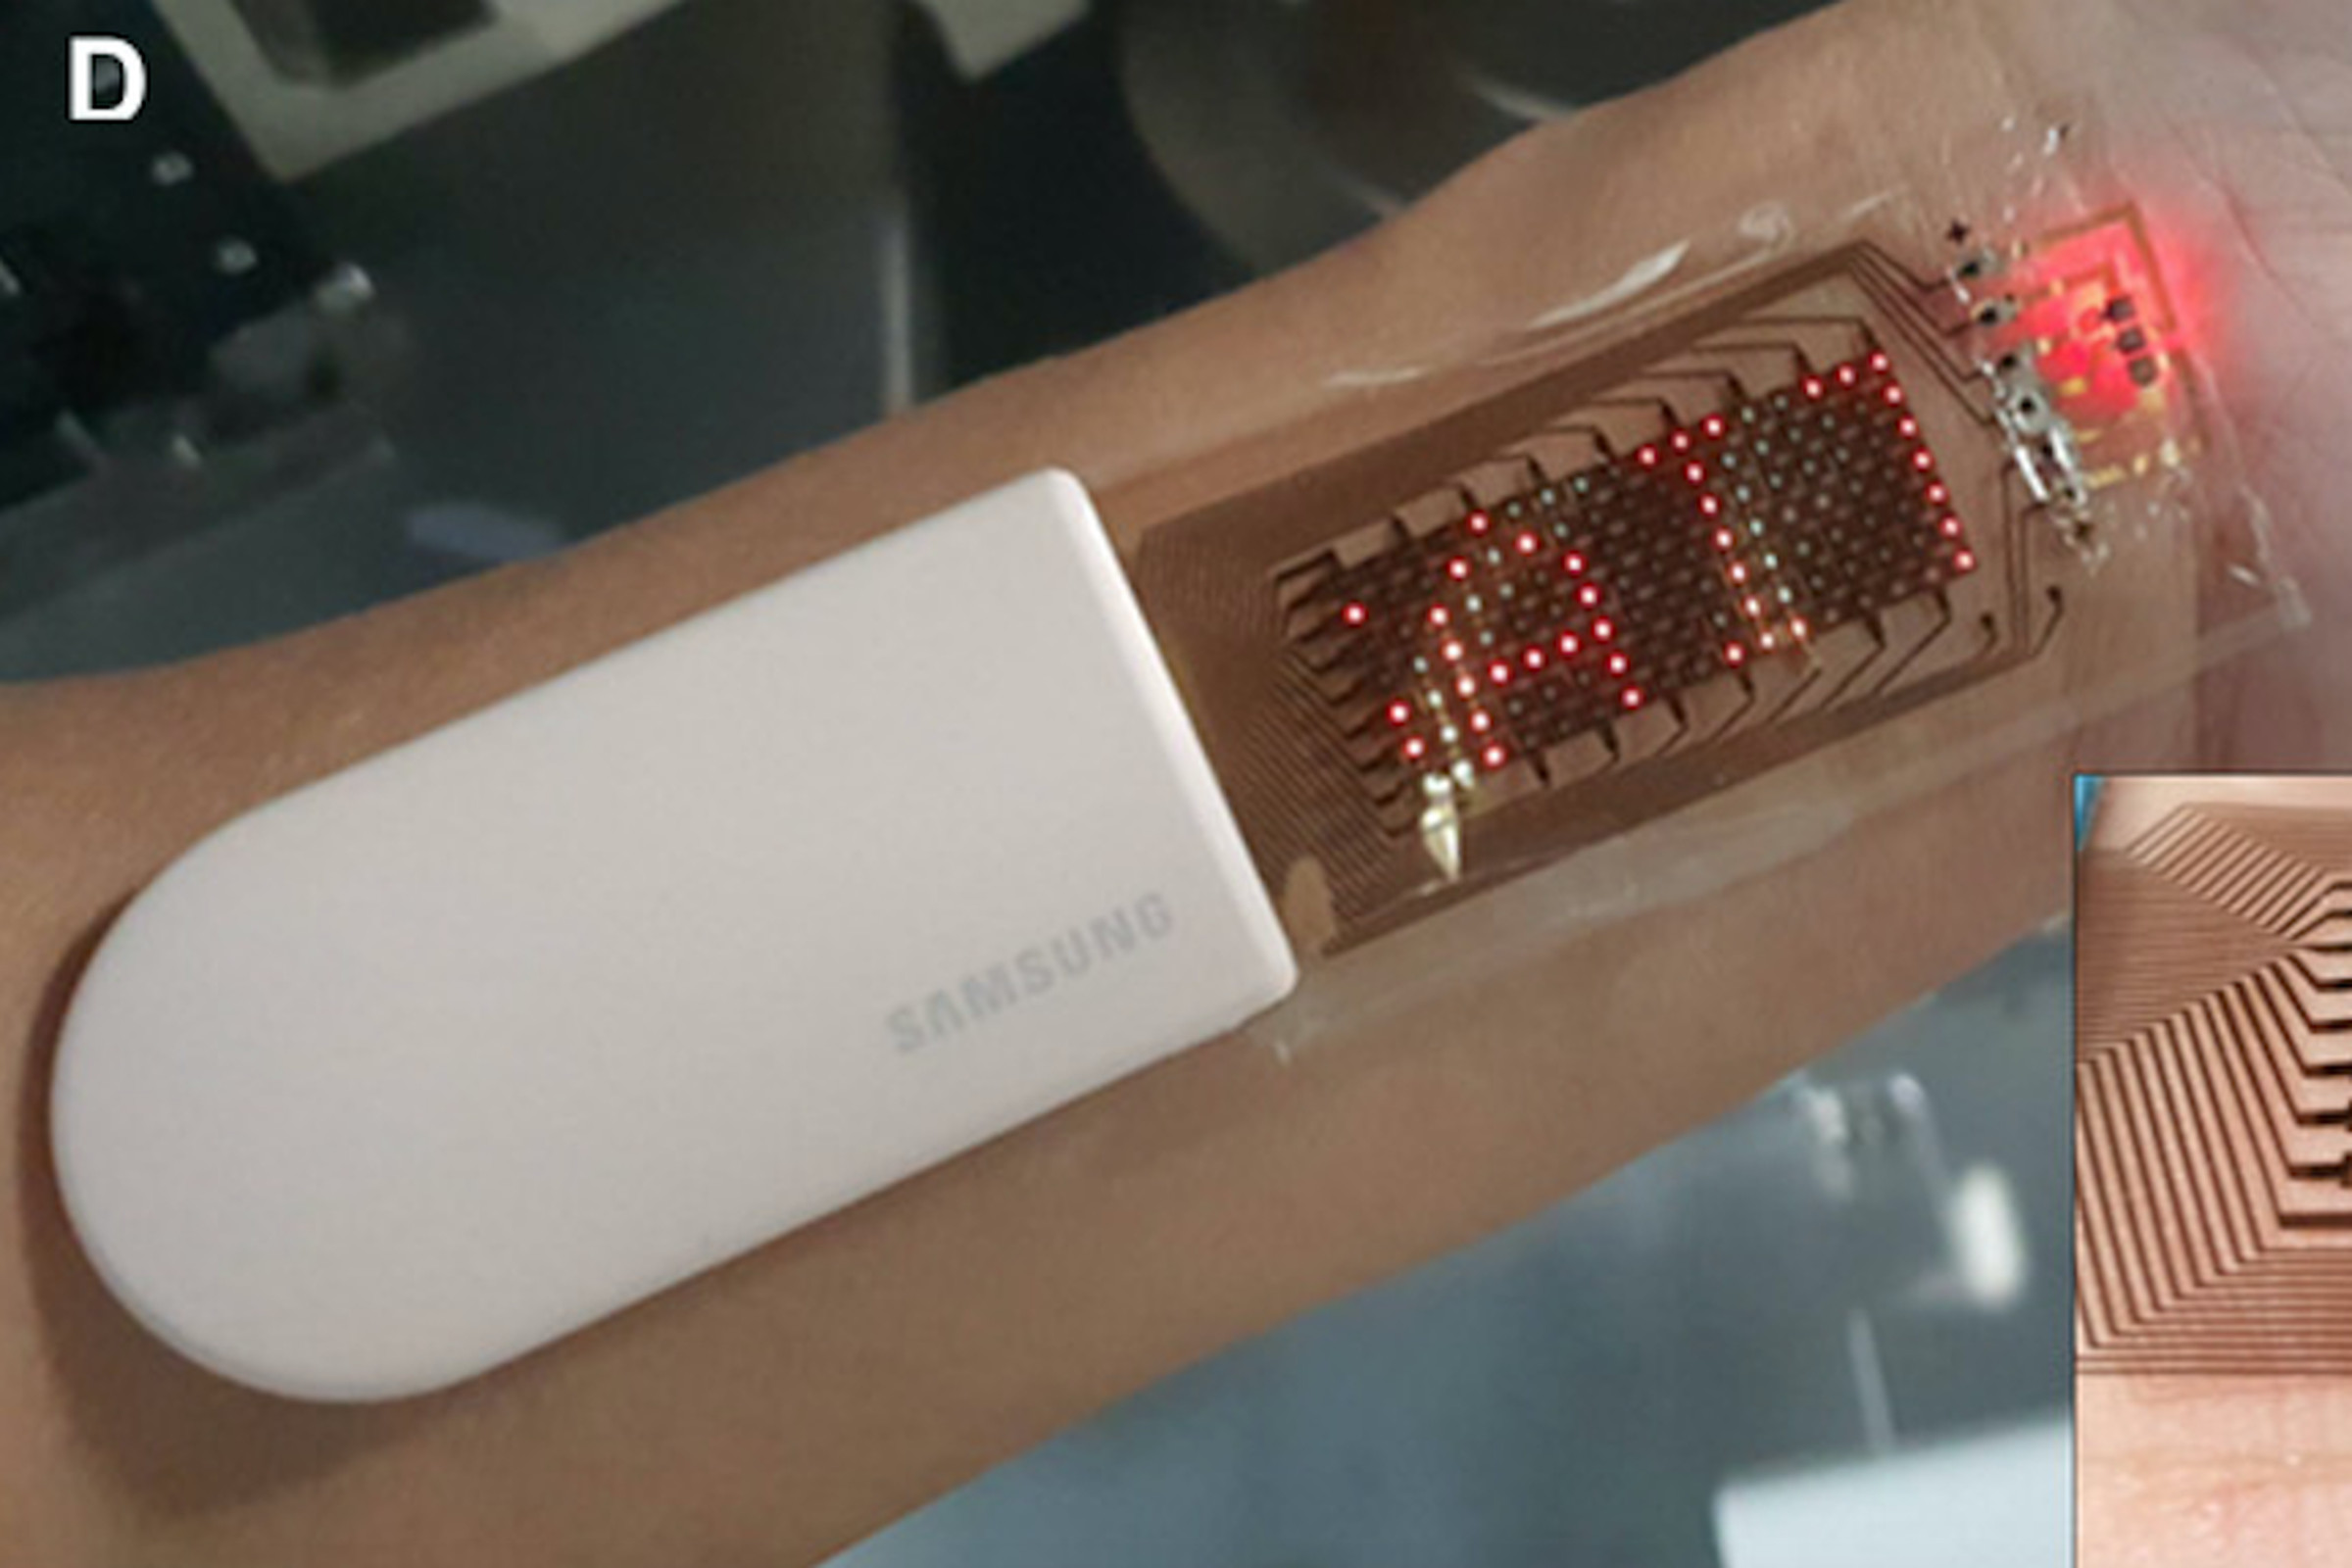 Samsung’s prototype heart rate monitor with stretchable OLED display. 